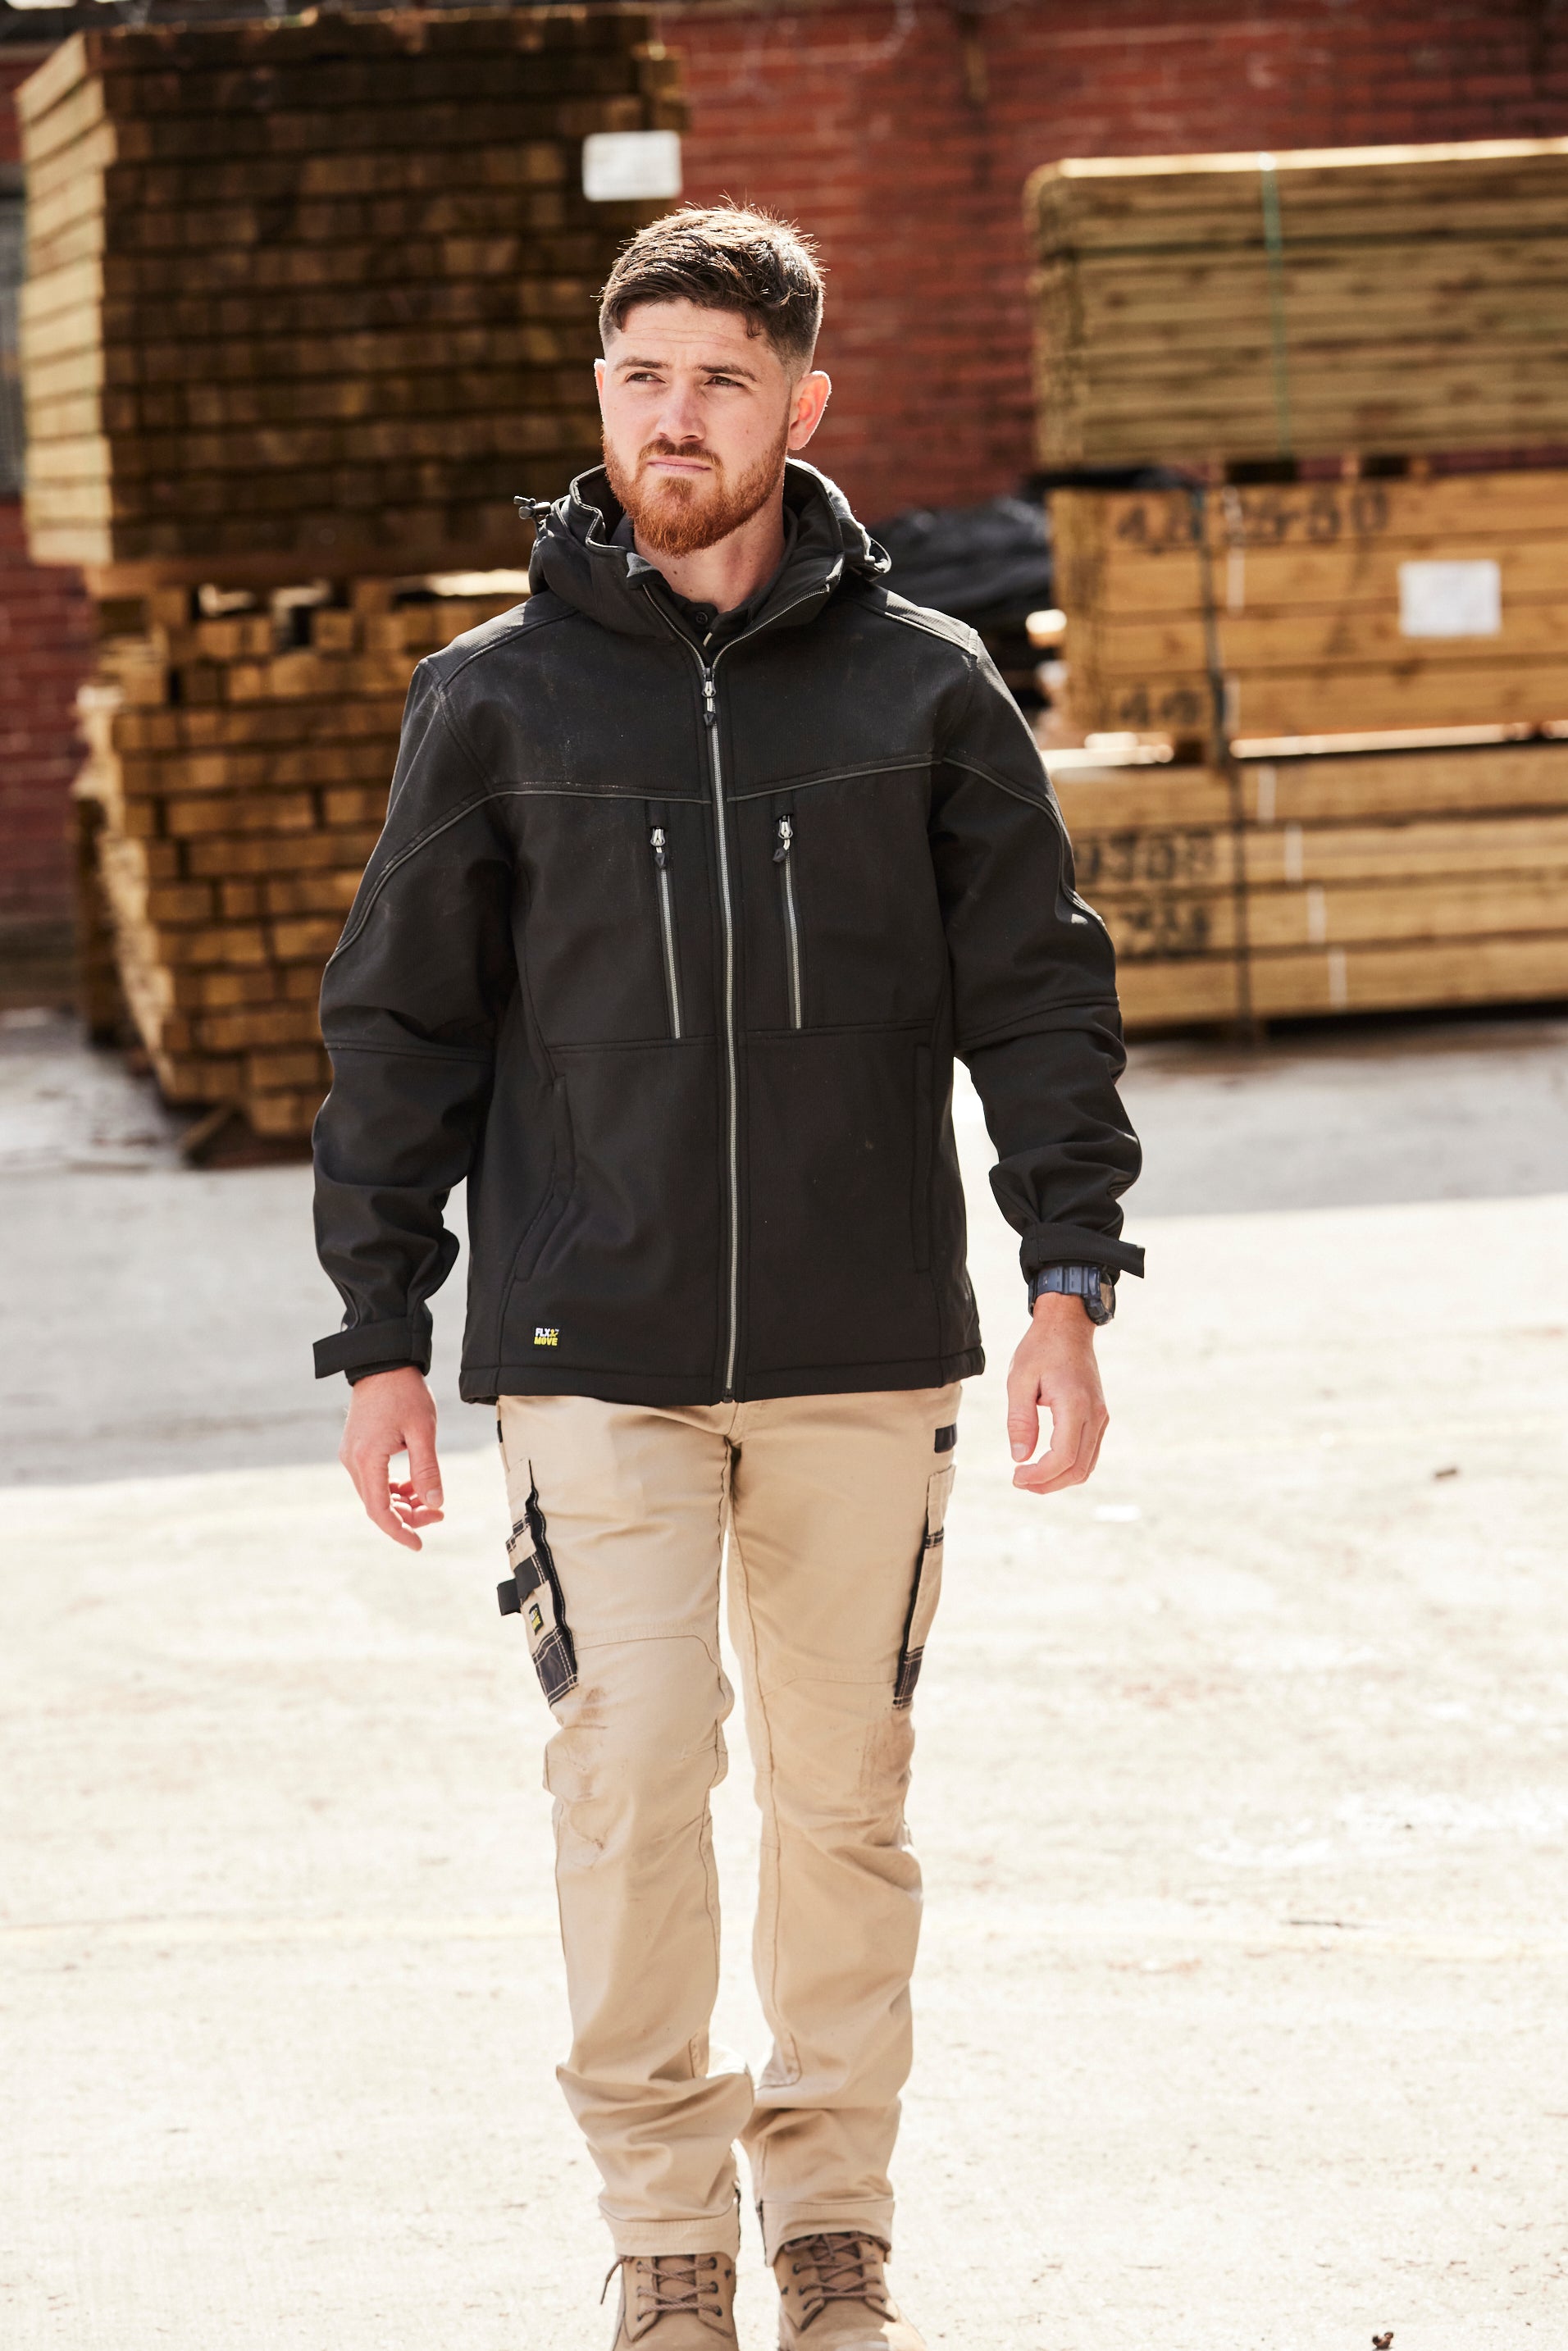 FLX & MOVE™ HOODED SOFT SHELL JACKET